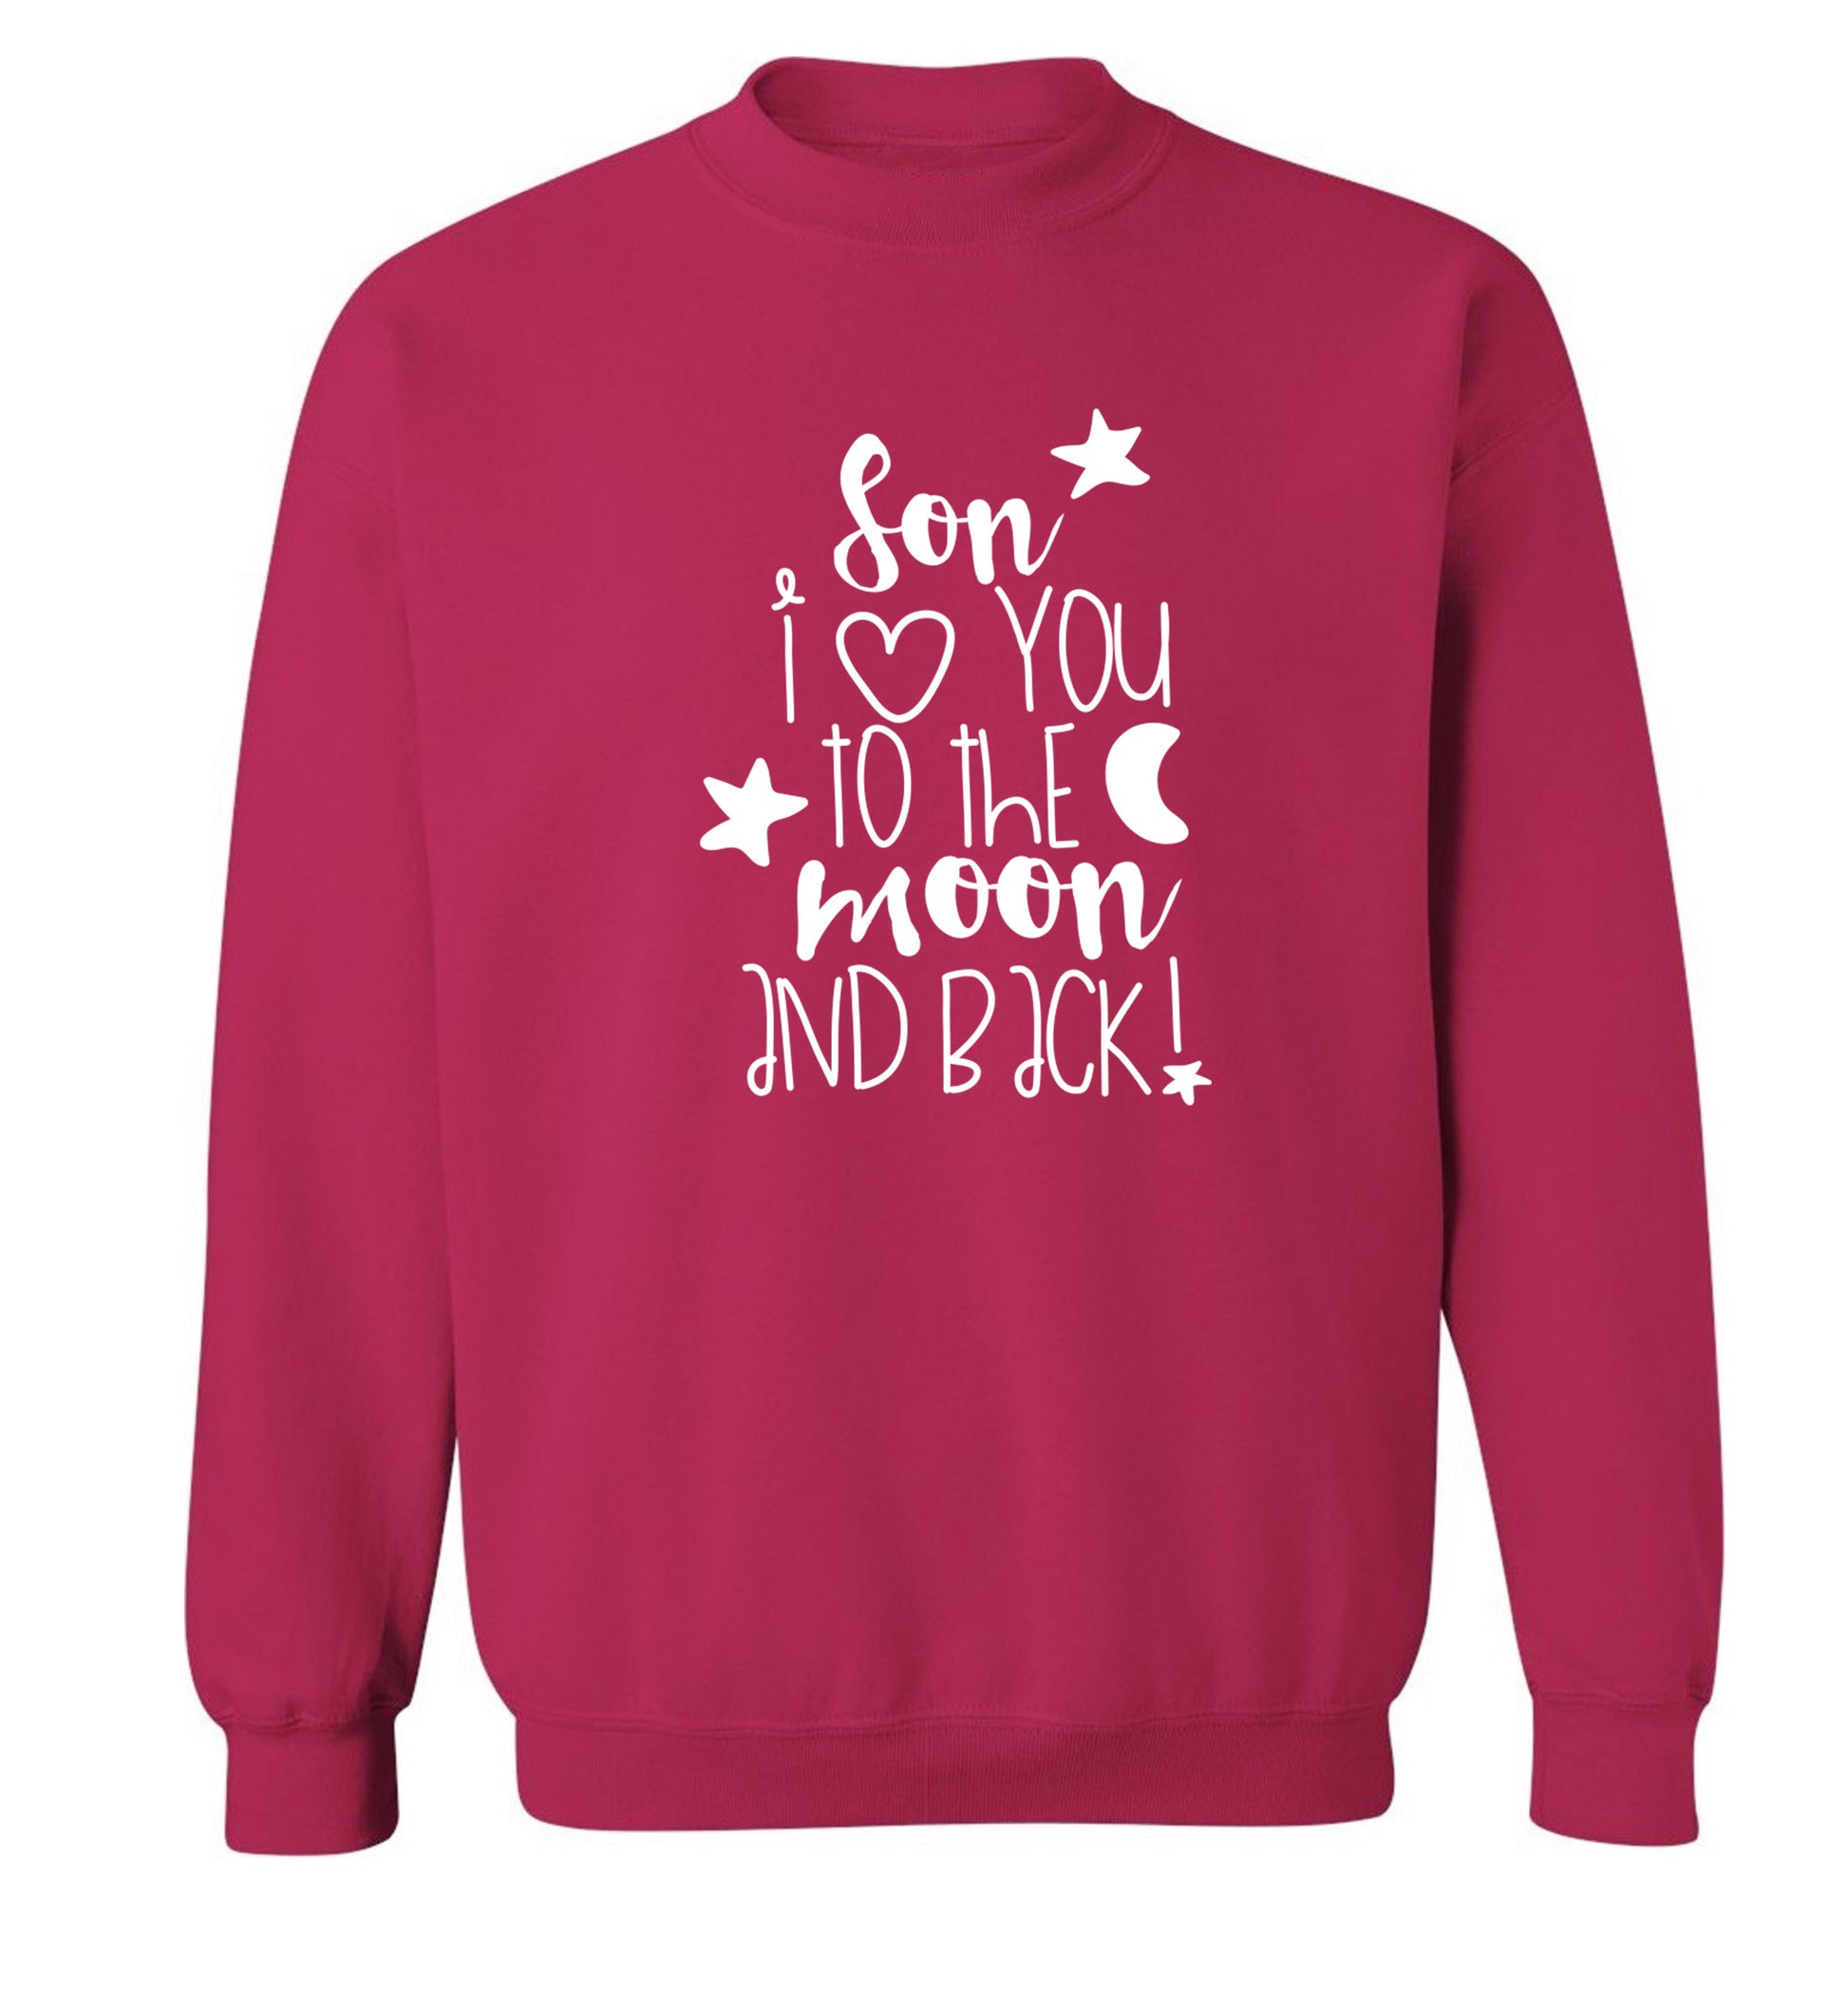 Son I love you to the moon and back Adult's unisex pink  sweater XL